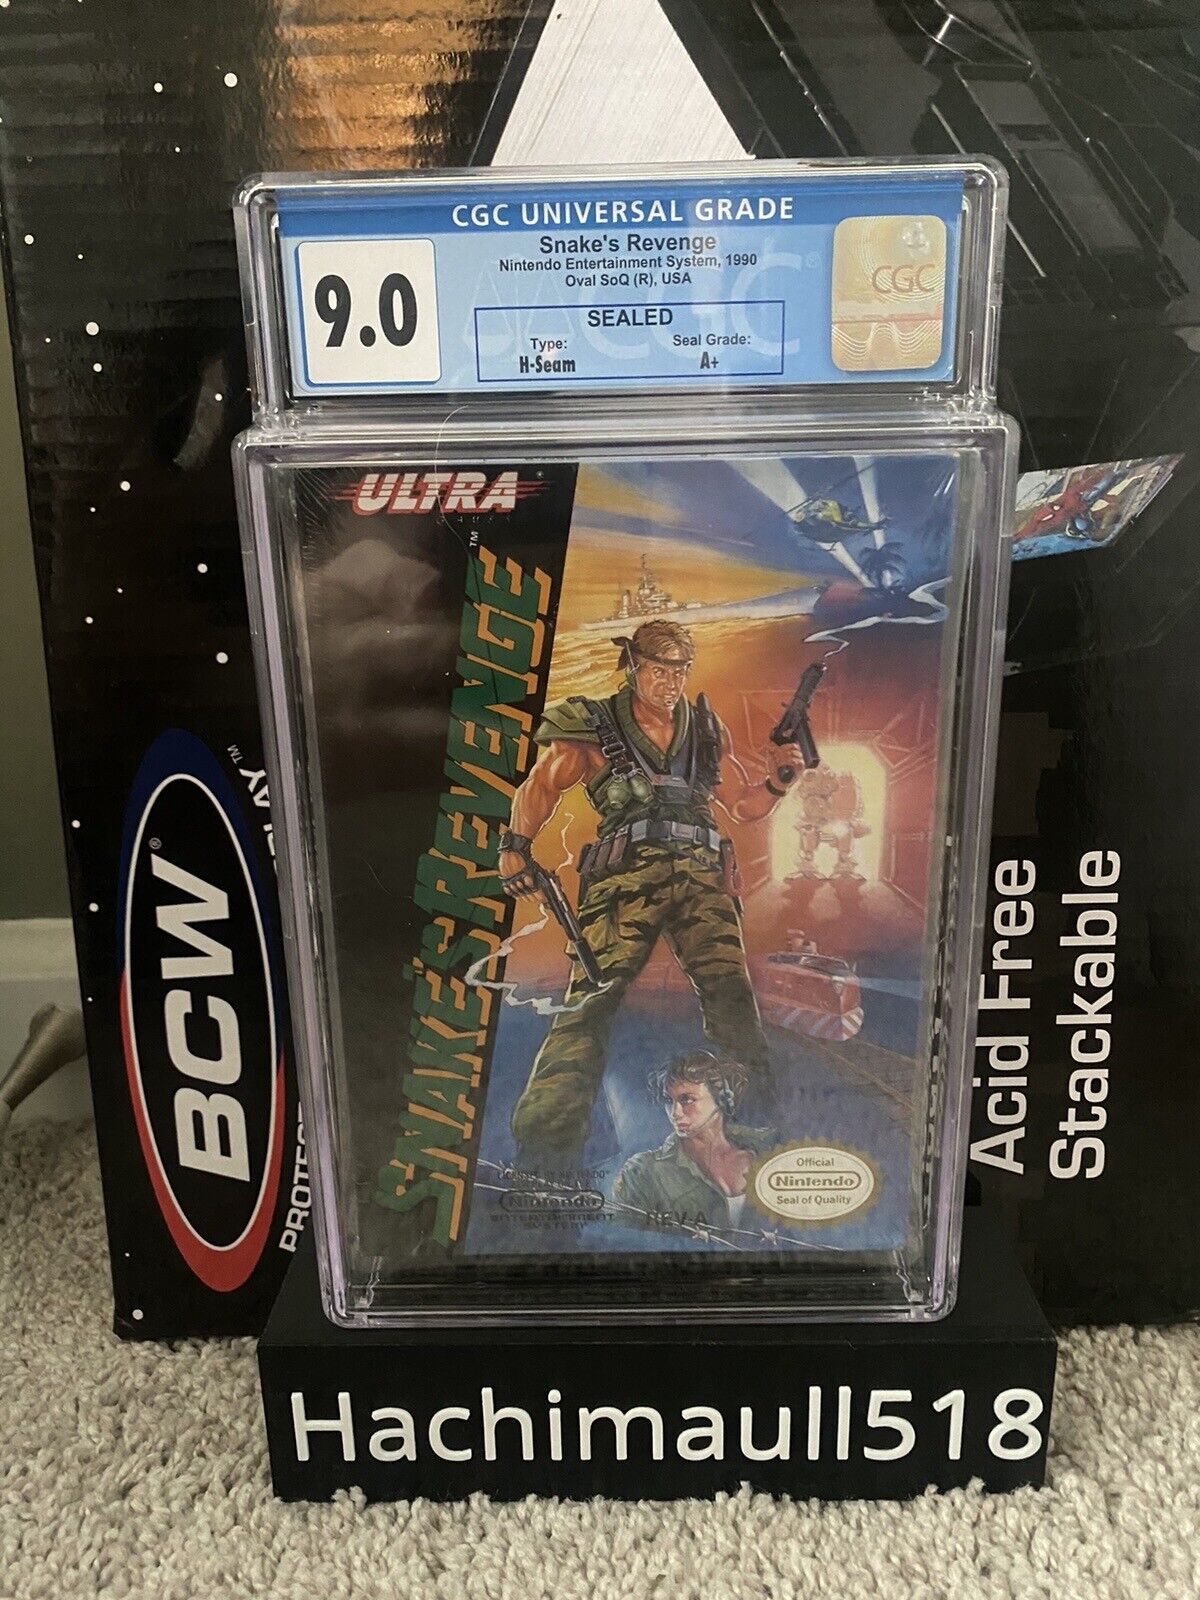 Snakes Revenge NES CGC 9.0 A+ Sealed With Hangtab Not WATA or VGA